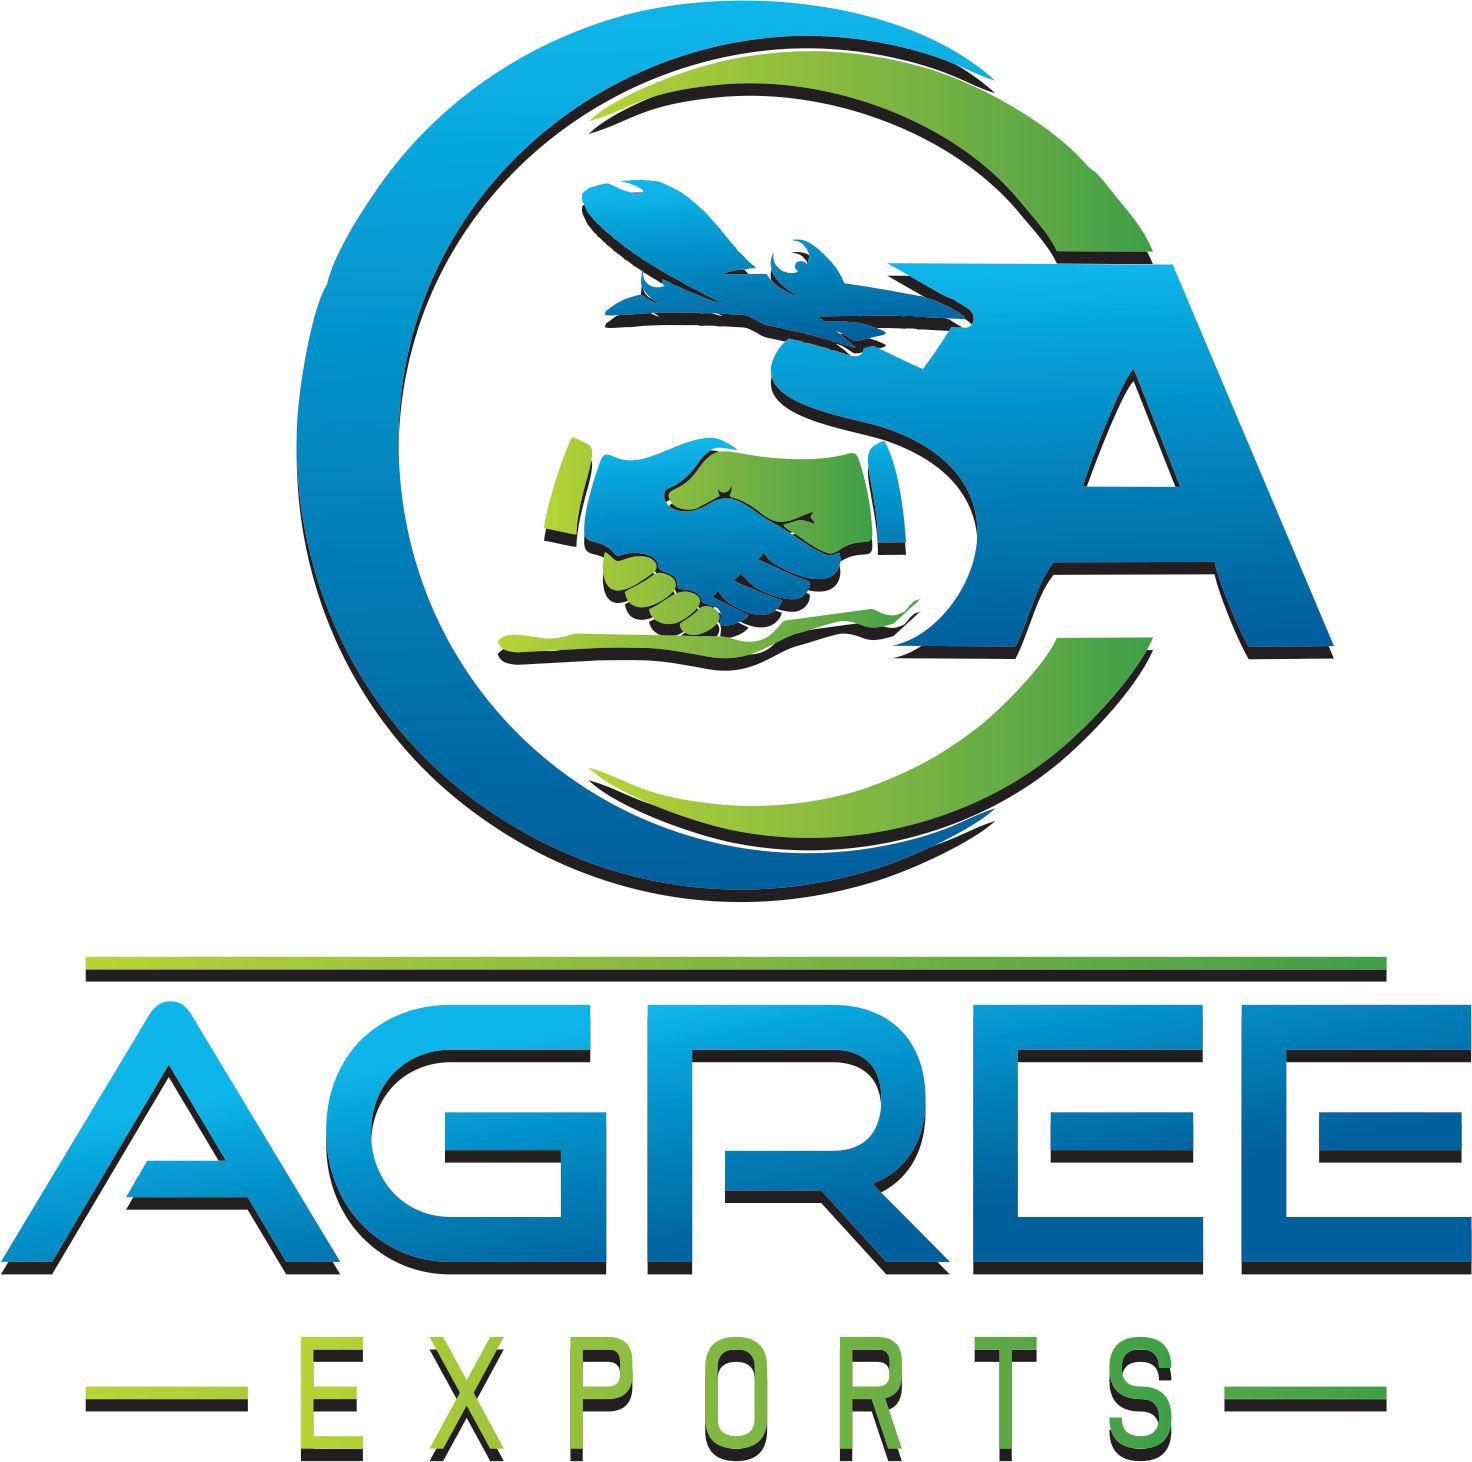 Agree Exports